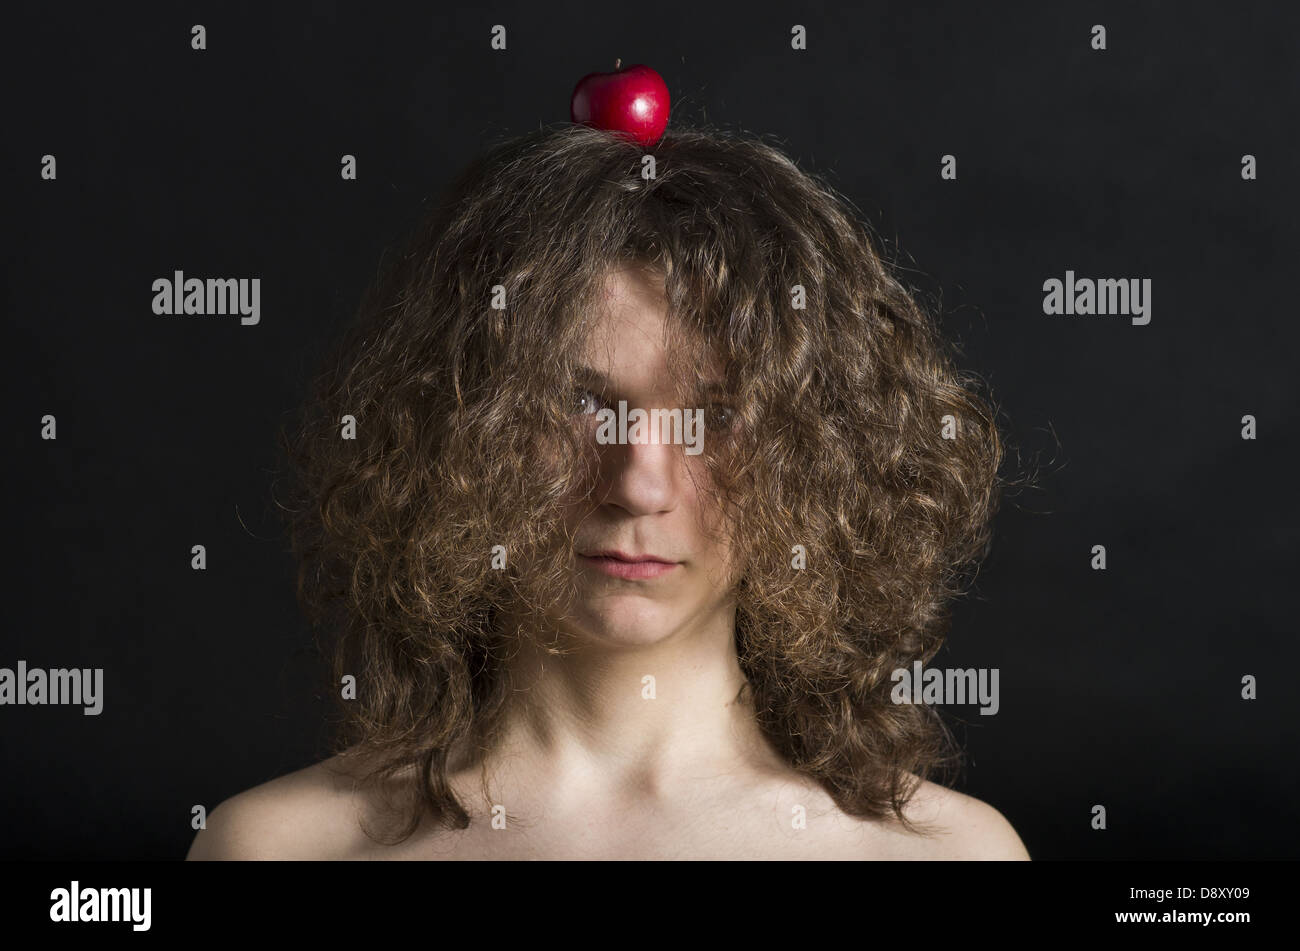 Portrait of the boy with an apple on his head Stock Photo